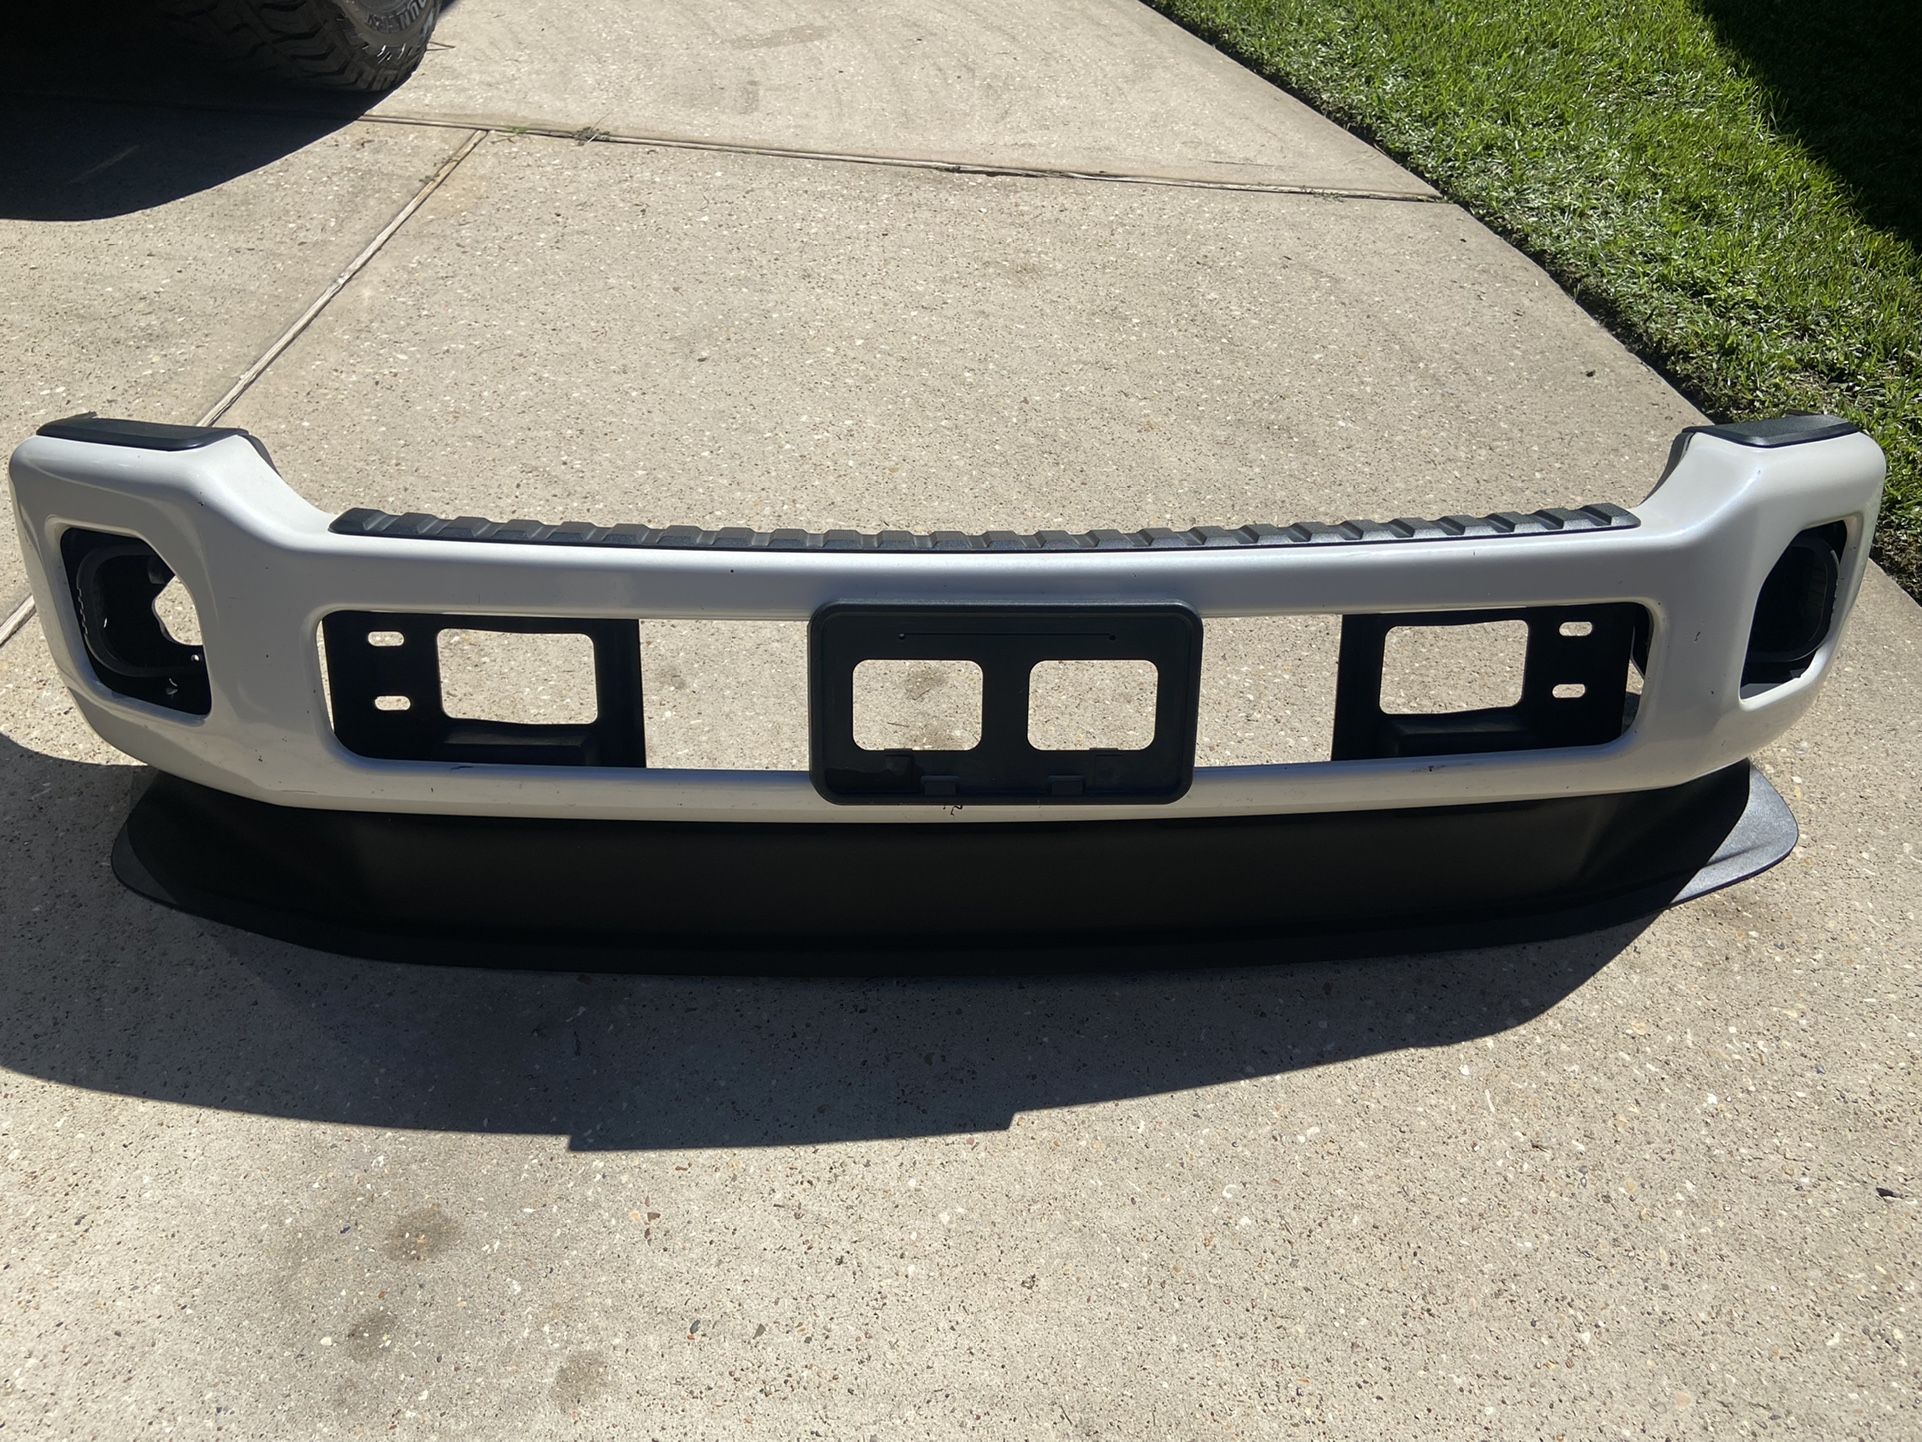 Ford F-350 Front Bumper White. Fits 2012-2016